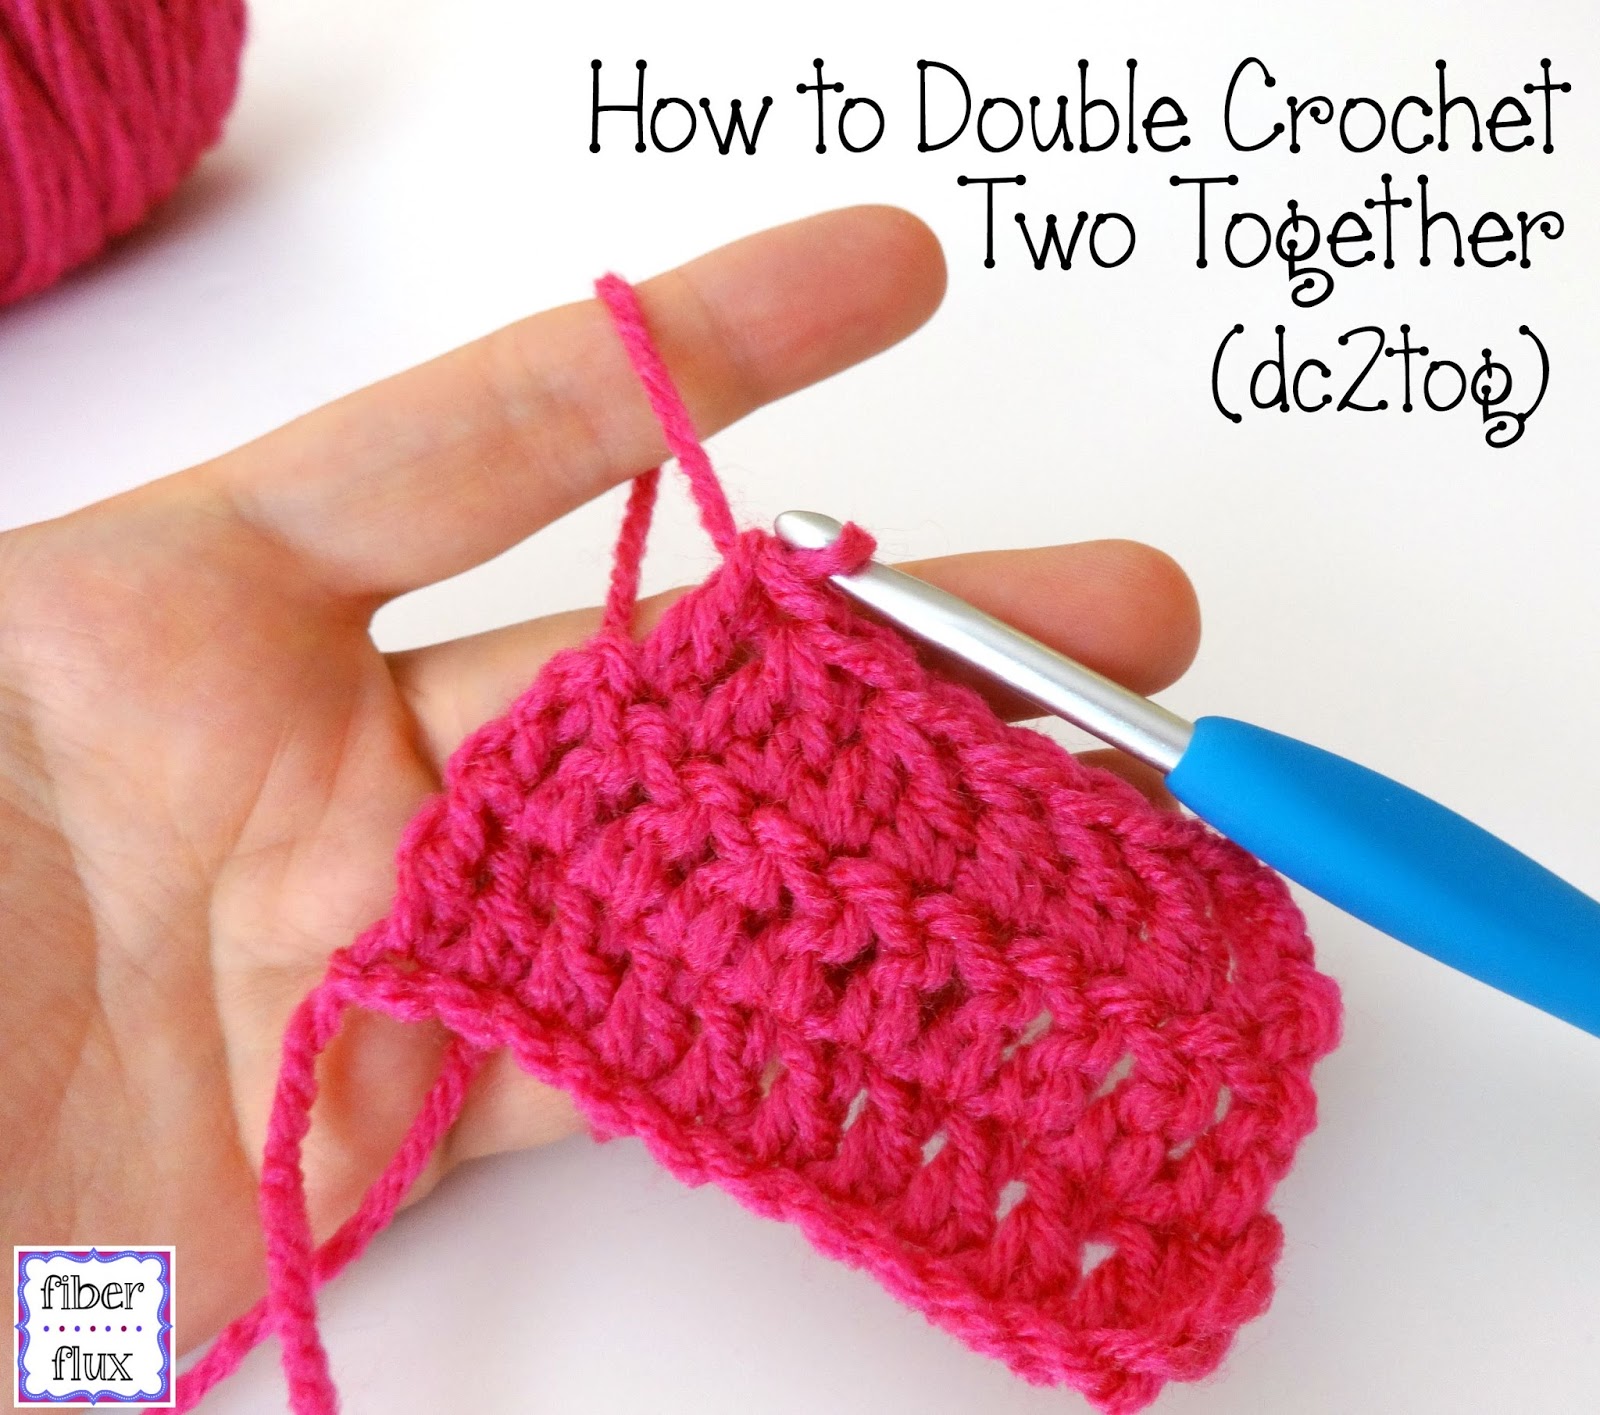 Fiber Flux: How To Double Crochet Two Together (dc2tog)